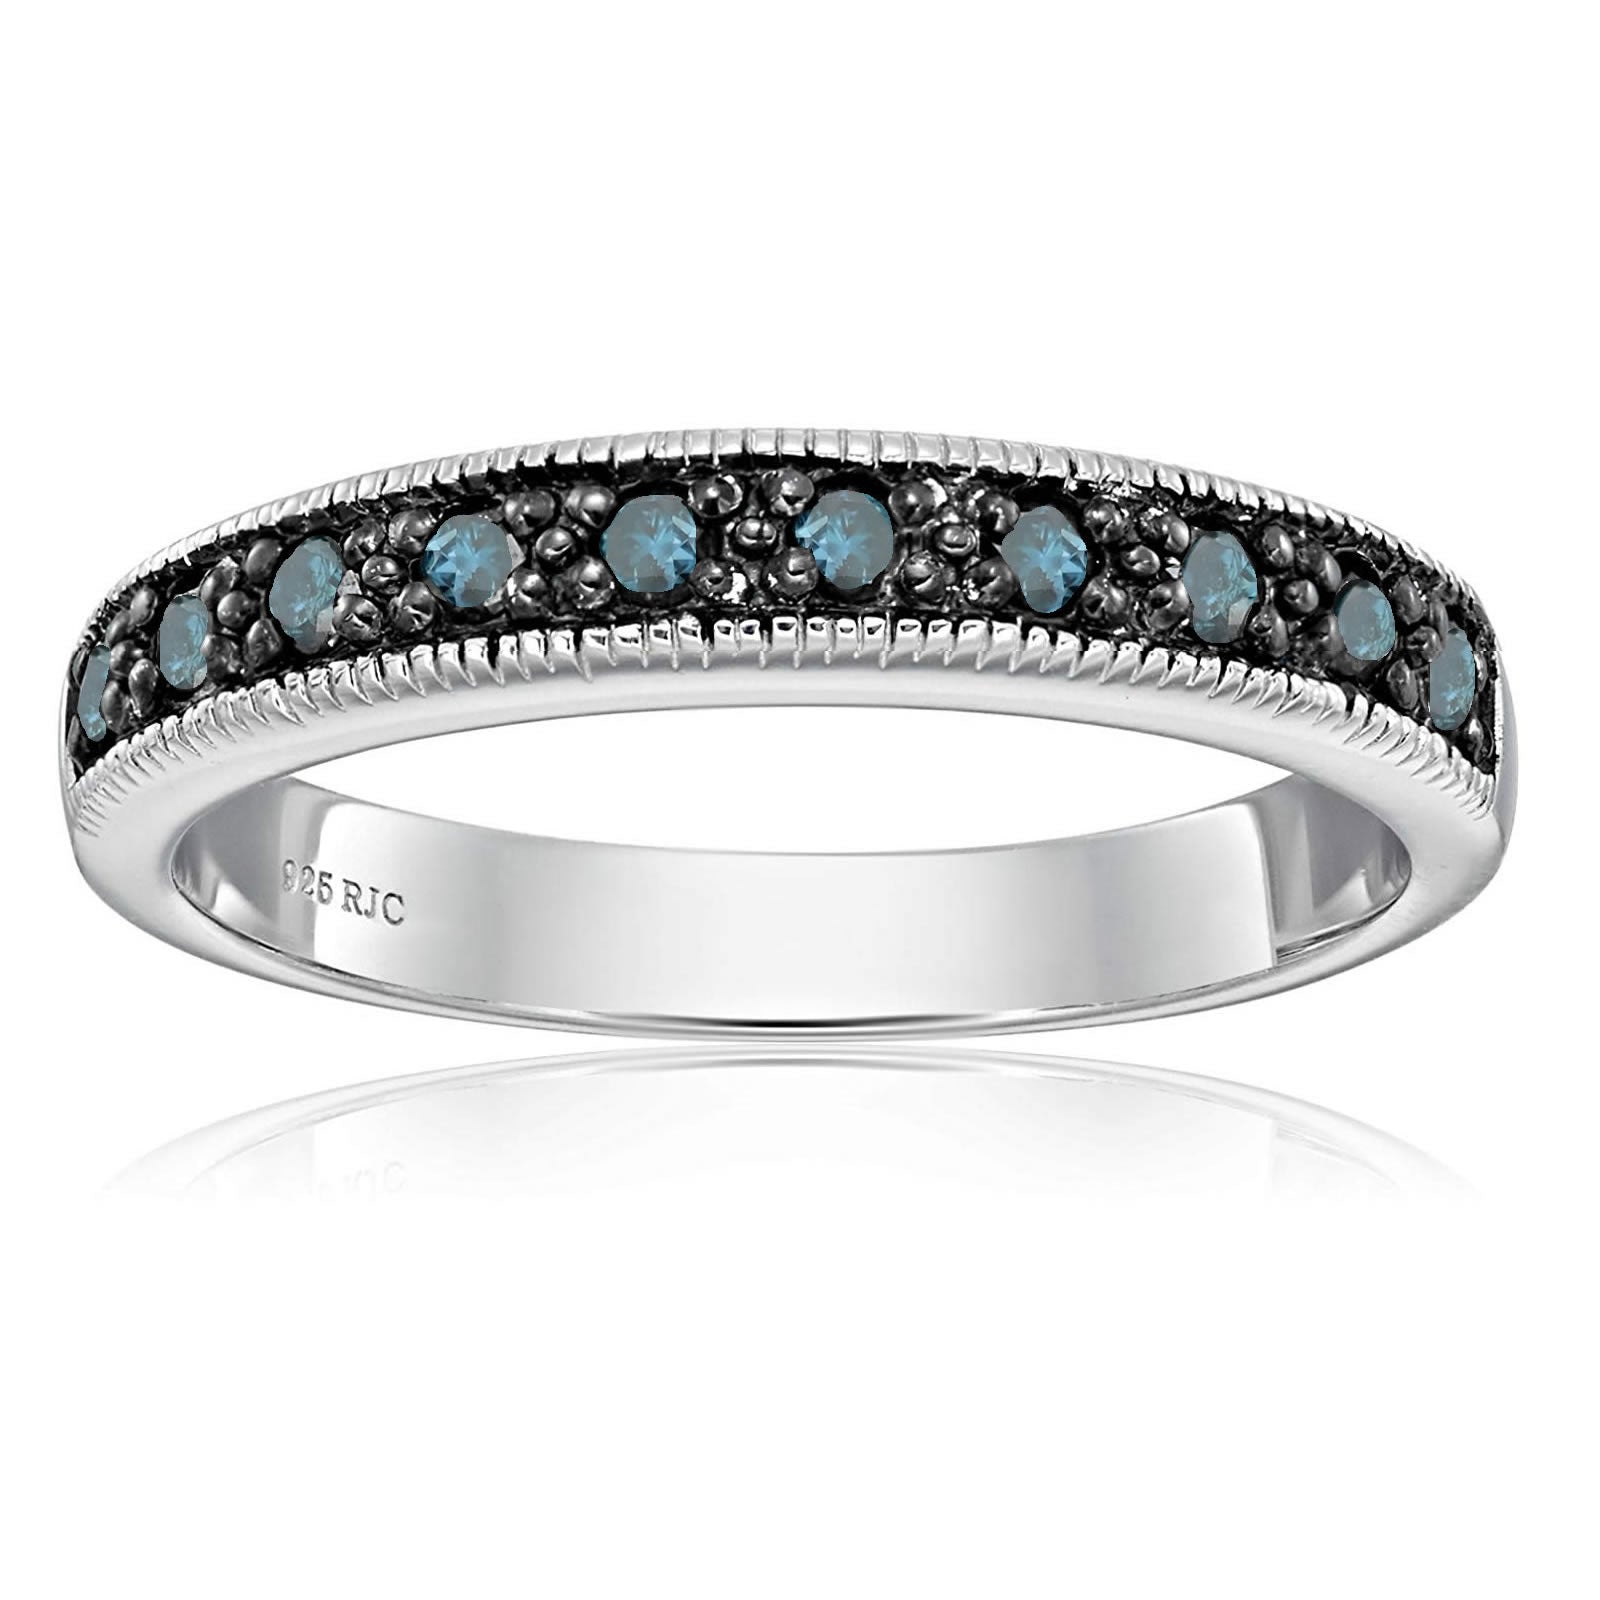 1/4 cttw Blue Diamond Ring .925 Sterling Silver with Milgrain and Black Rhodium